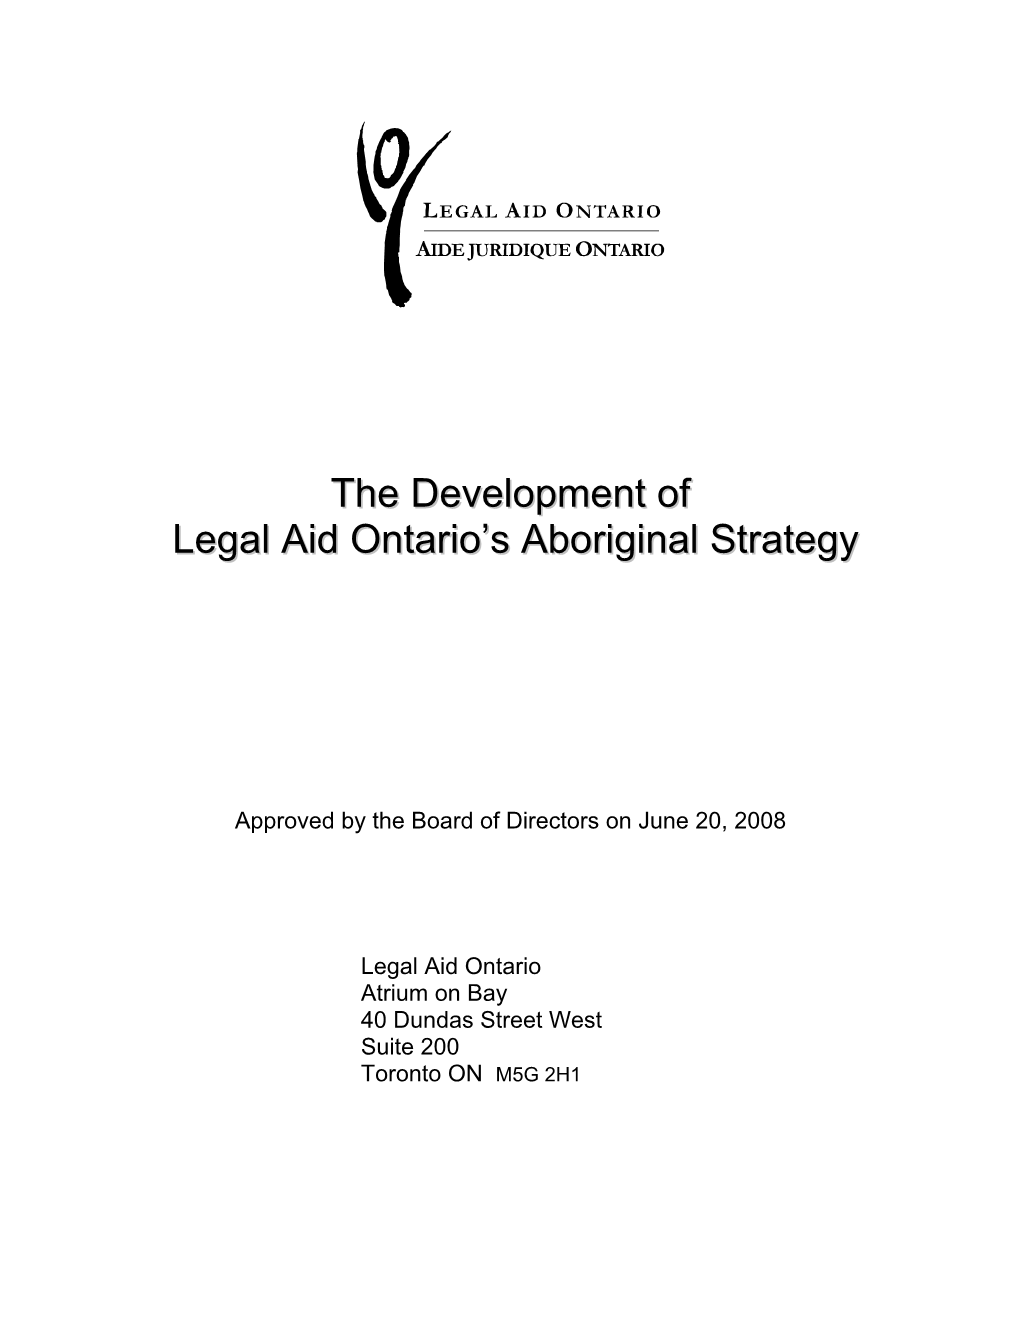 The Development of Legal Aid Ontario's Aboriginal Strategy